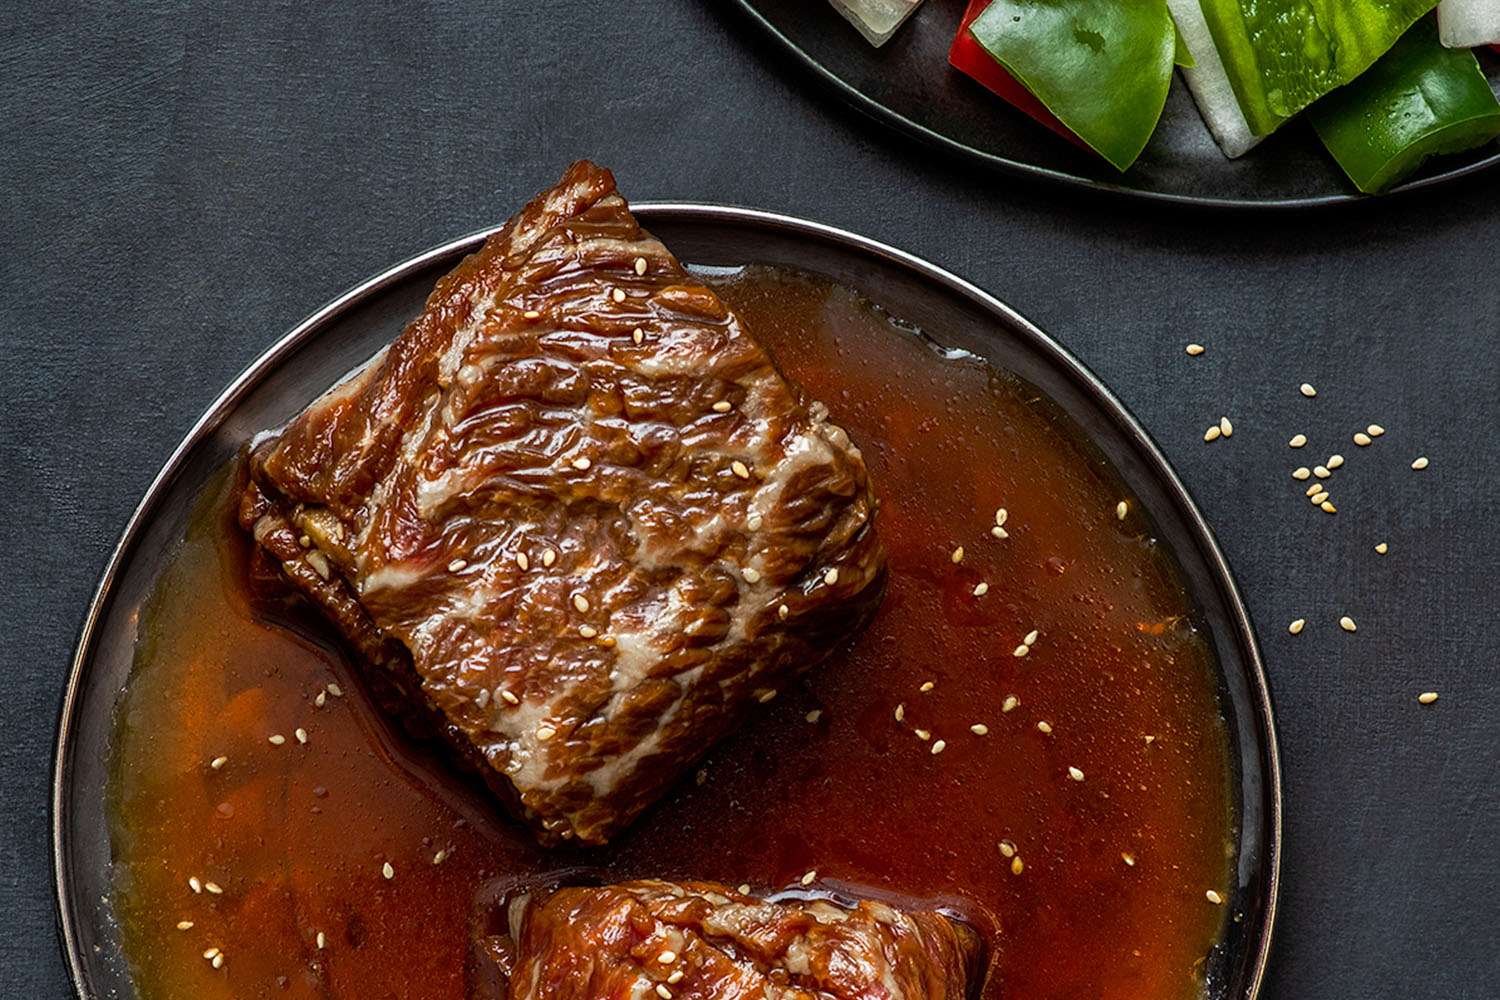 Sam's galbi short ribs are long on flavor